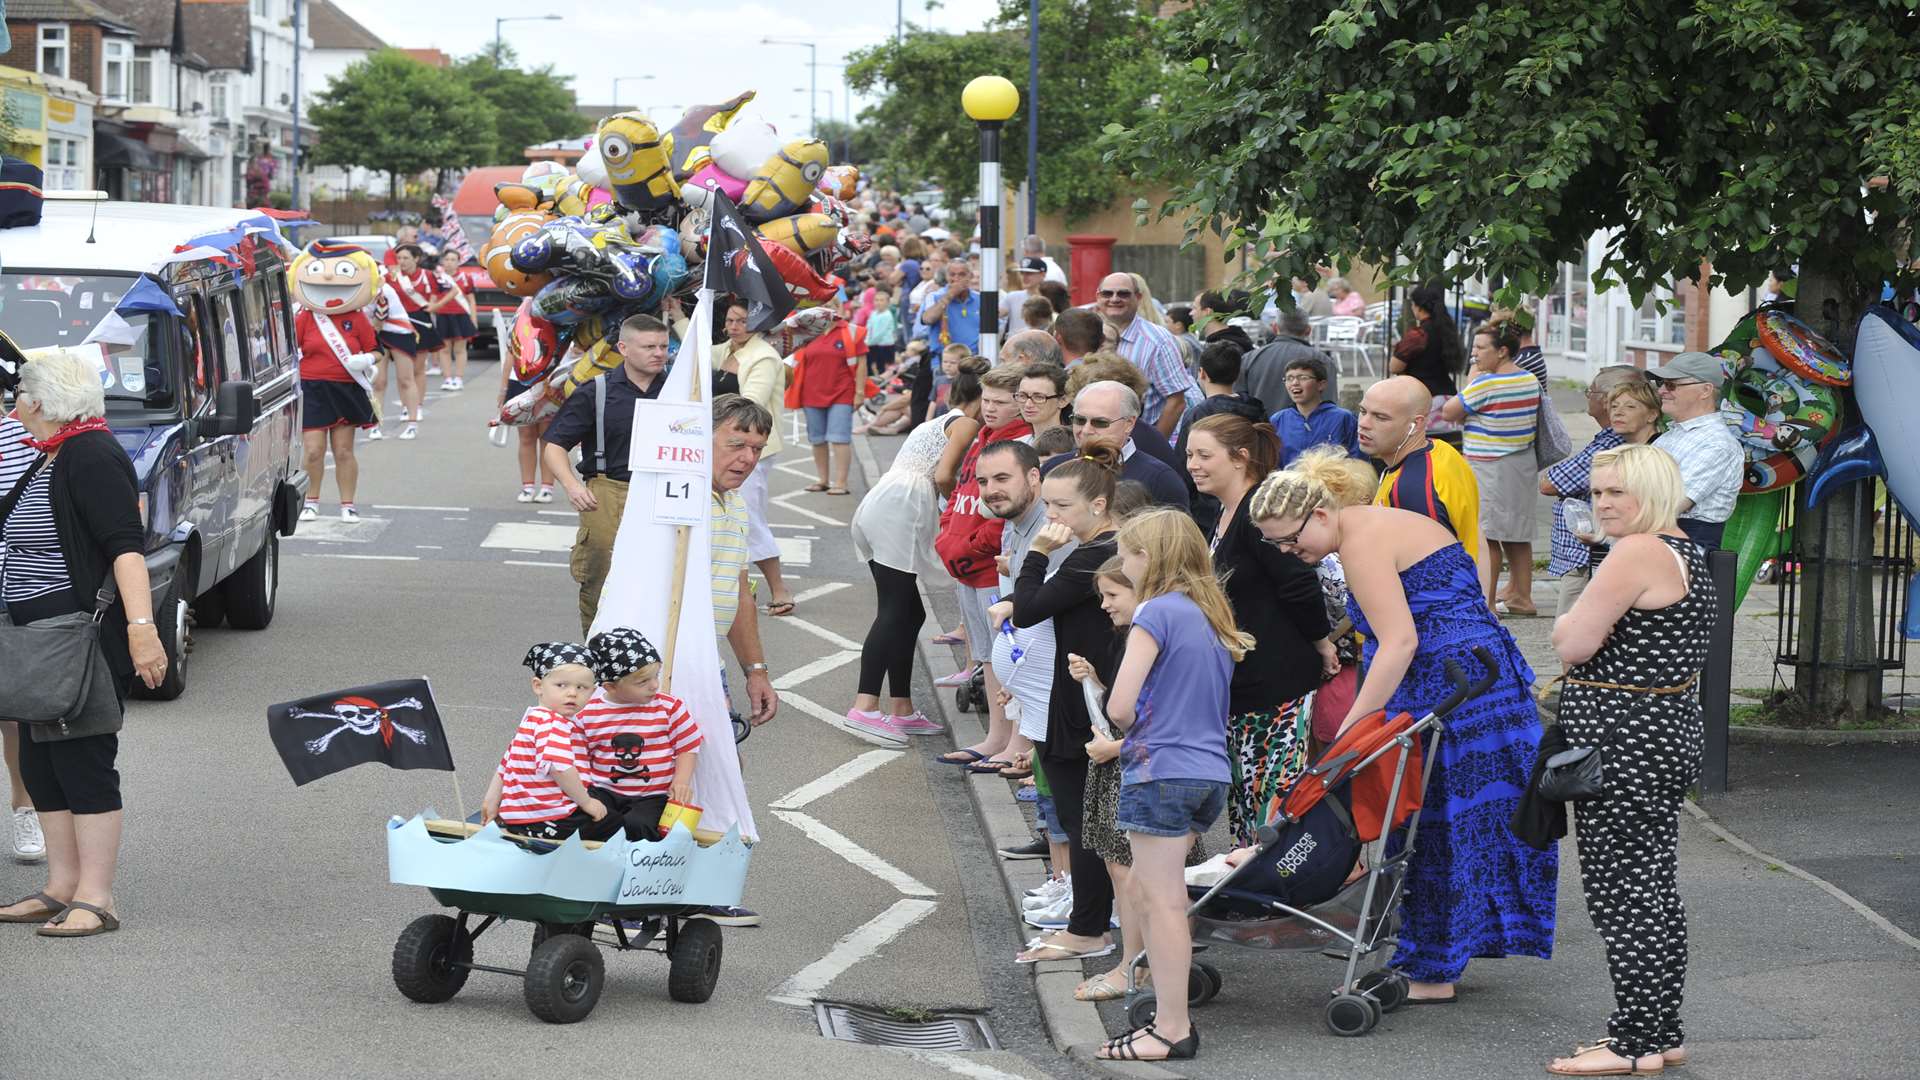 The Whitstable carnival has lacked support in recent years, according to organisers